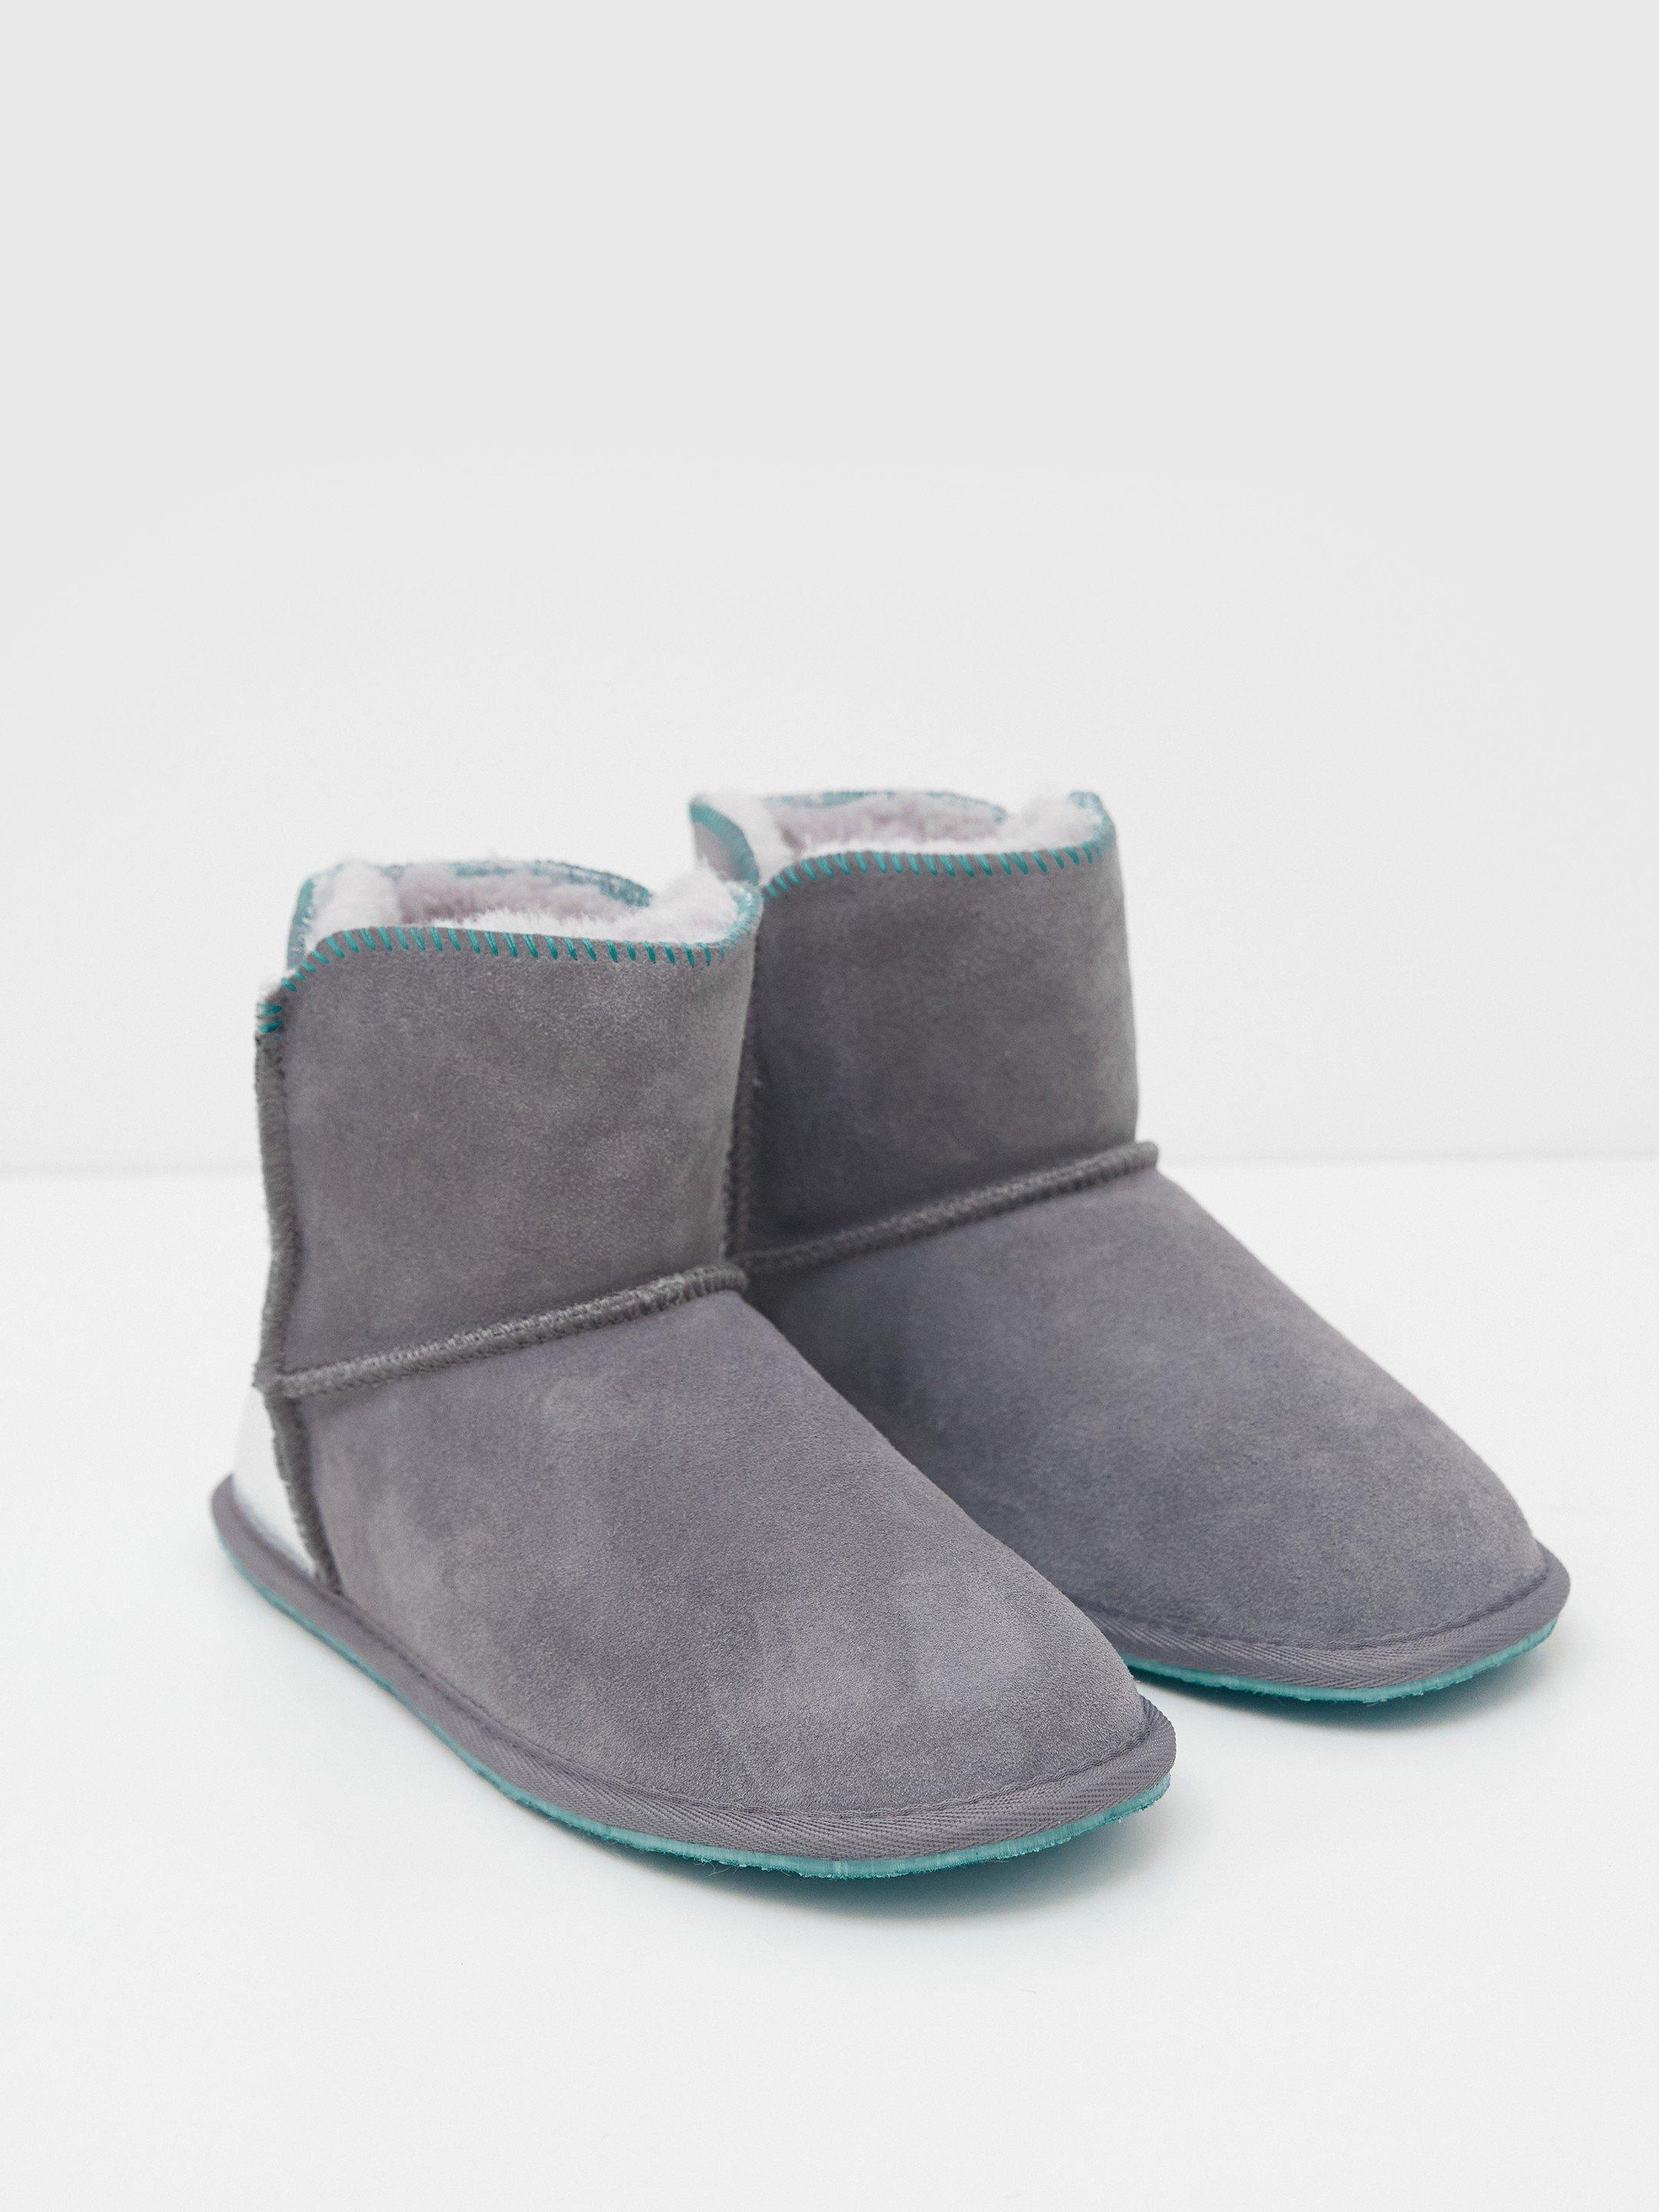 Suede and Shearling Bootie in DK GREY - FLAT FRONT